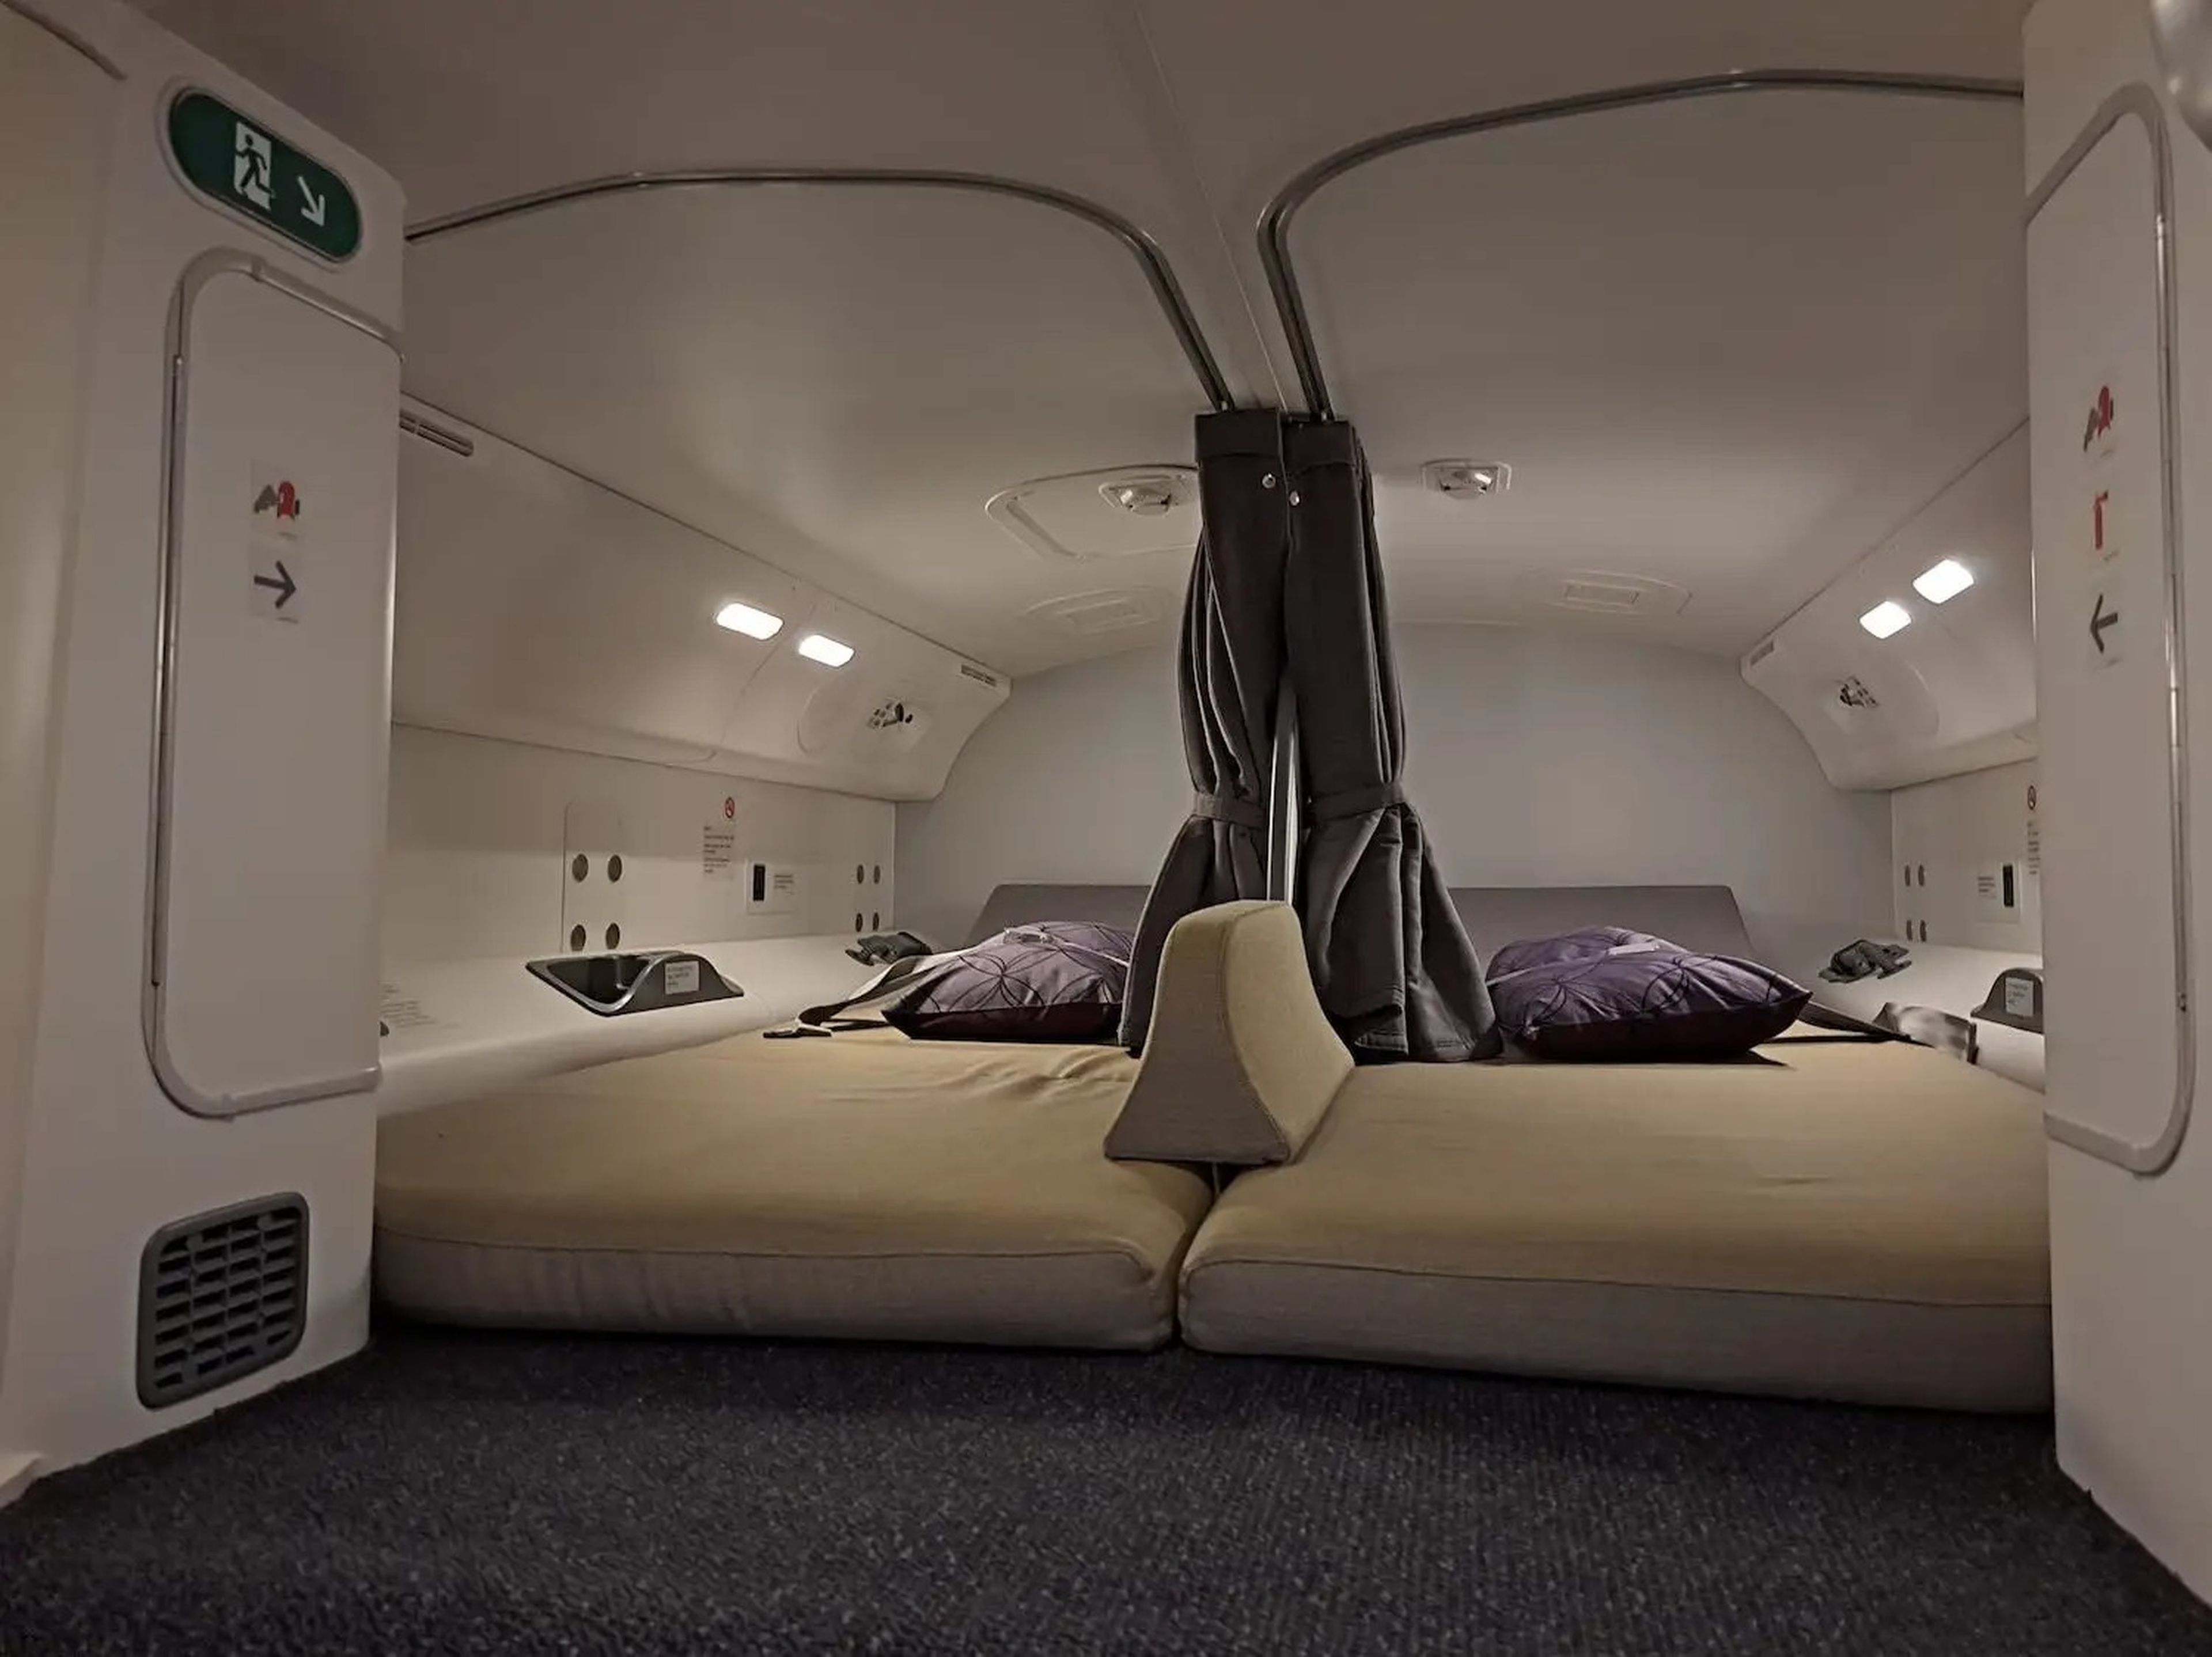 The pilot sleeping area on a Boeing 787-9